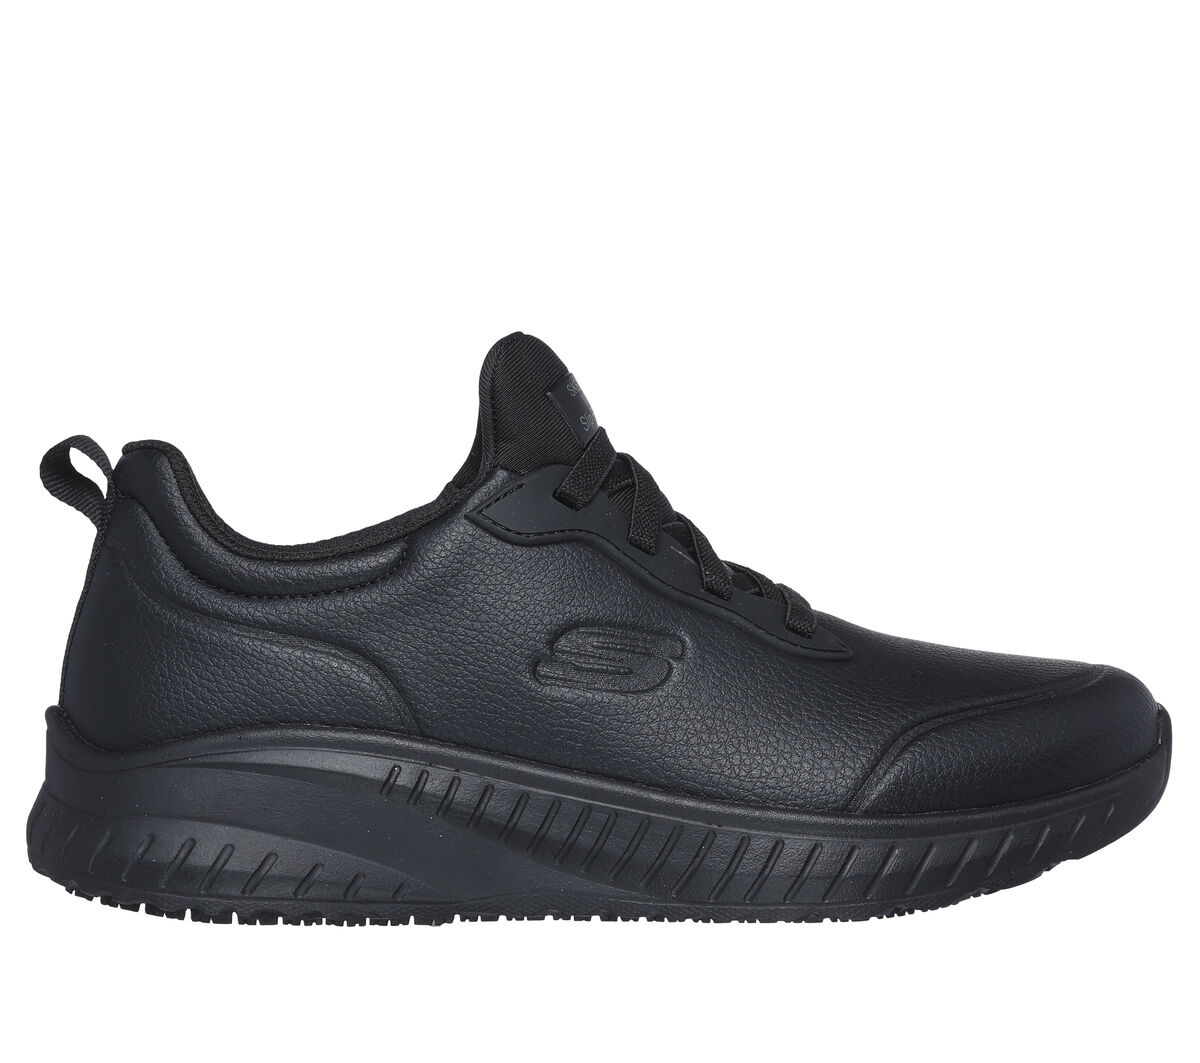 Skechers Squad Slip Resistant Women's Work Trainers - Black from £44.80